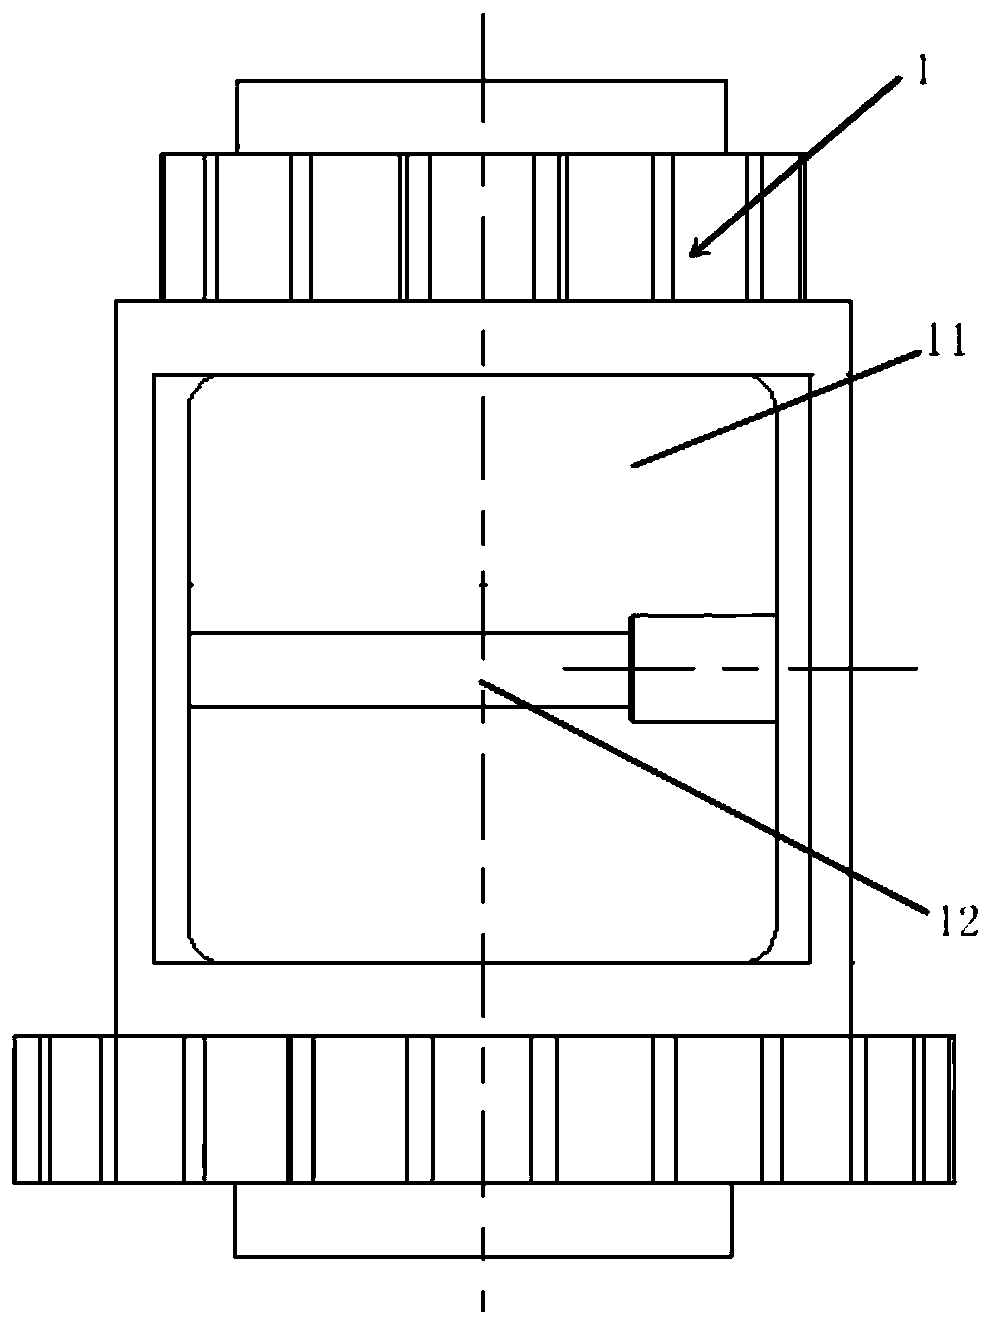 Sintering-deforming-prevention hollow structure differential mechanism shell machining method